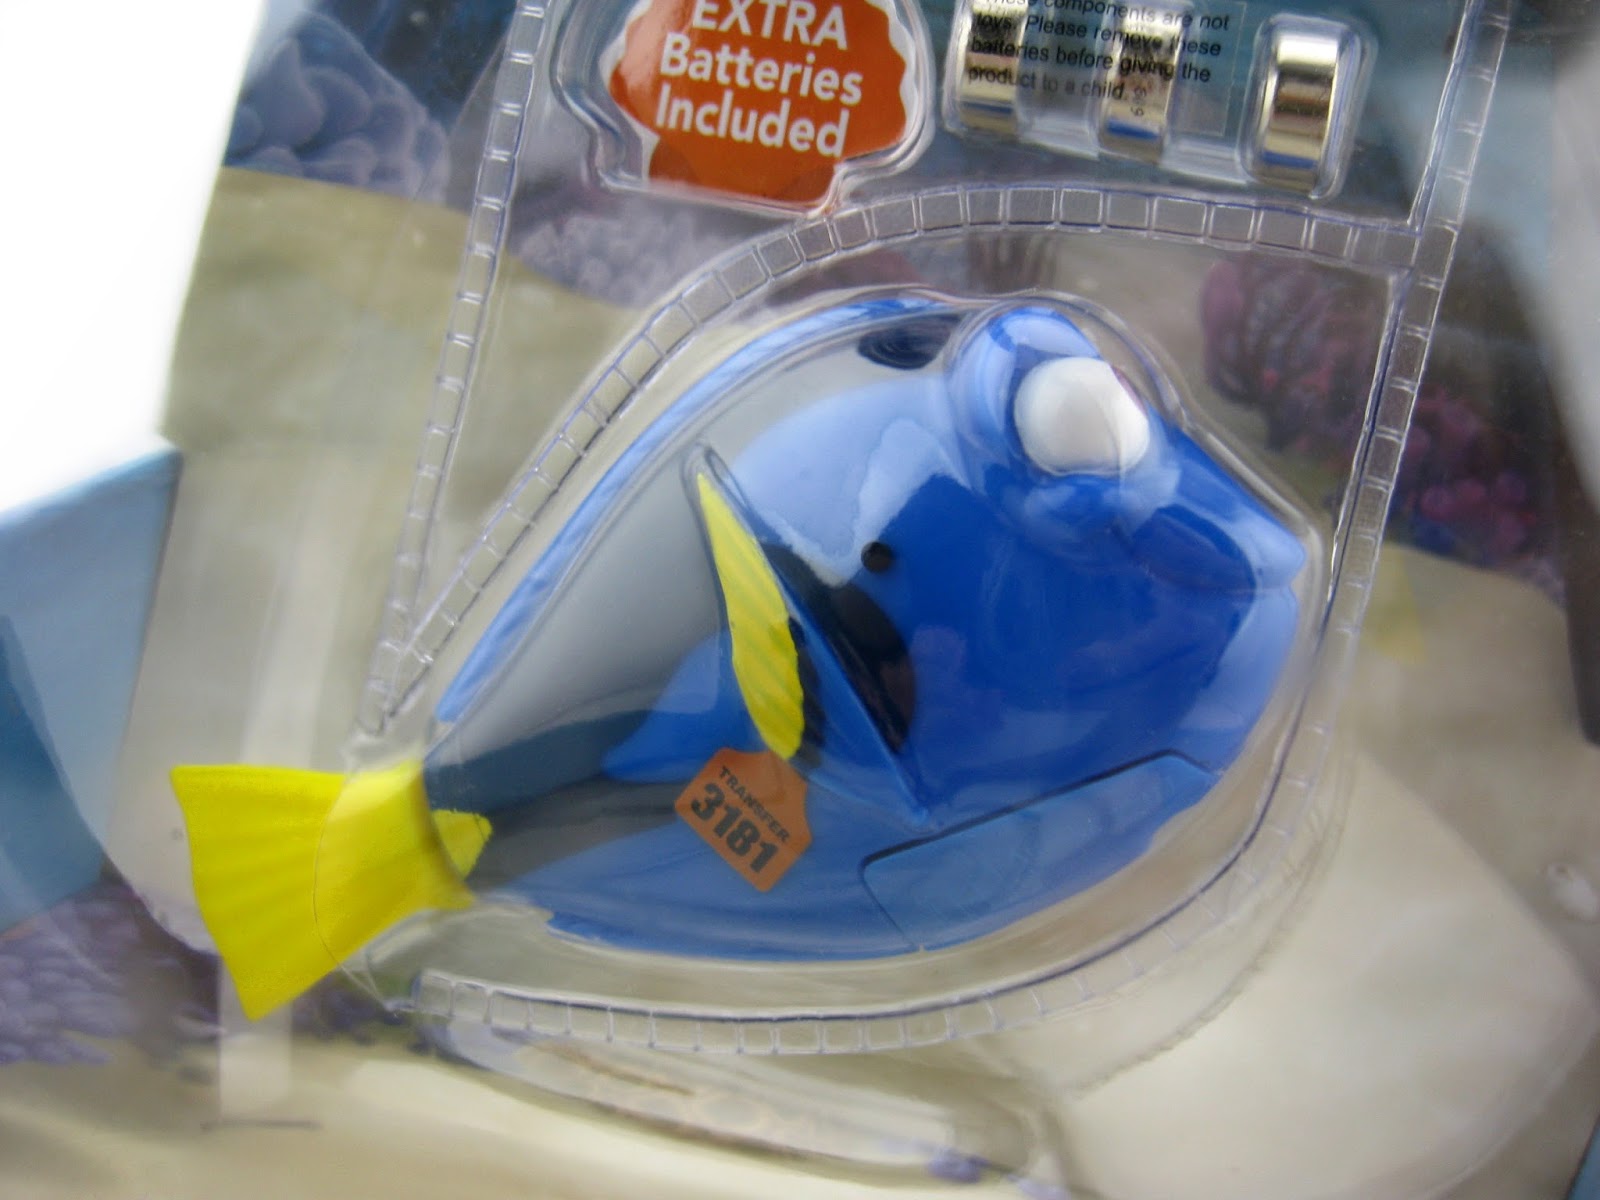 finding dory coffee pot playset